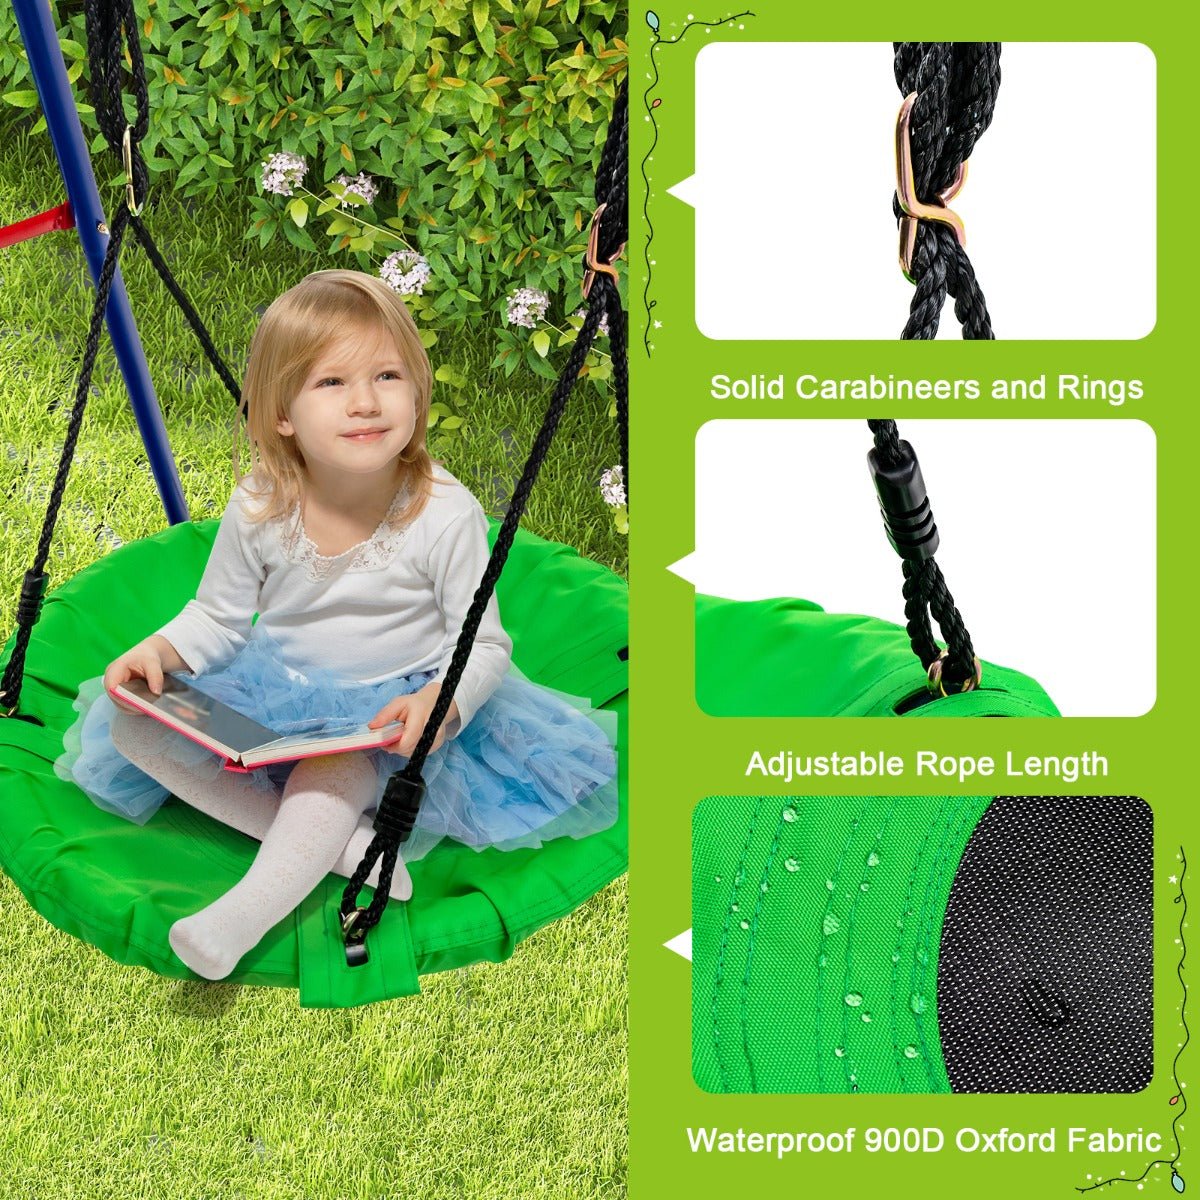 Kids Swing Set with Climbing Ladder: Explore and Play Outdoors